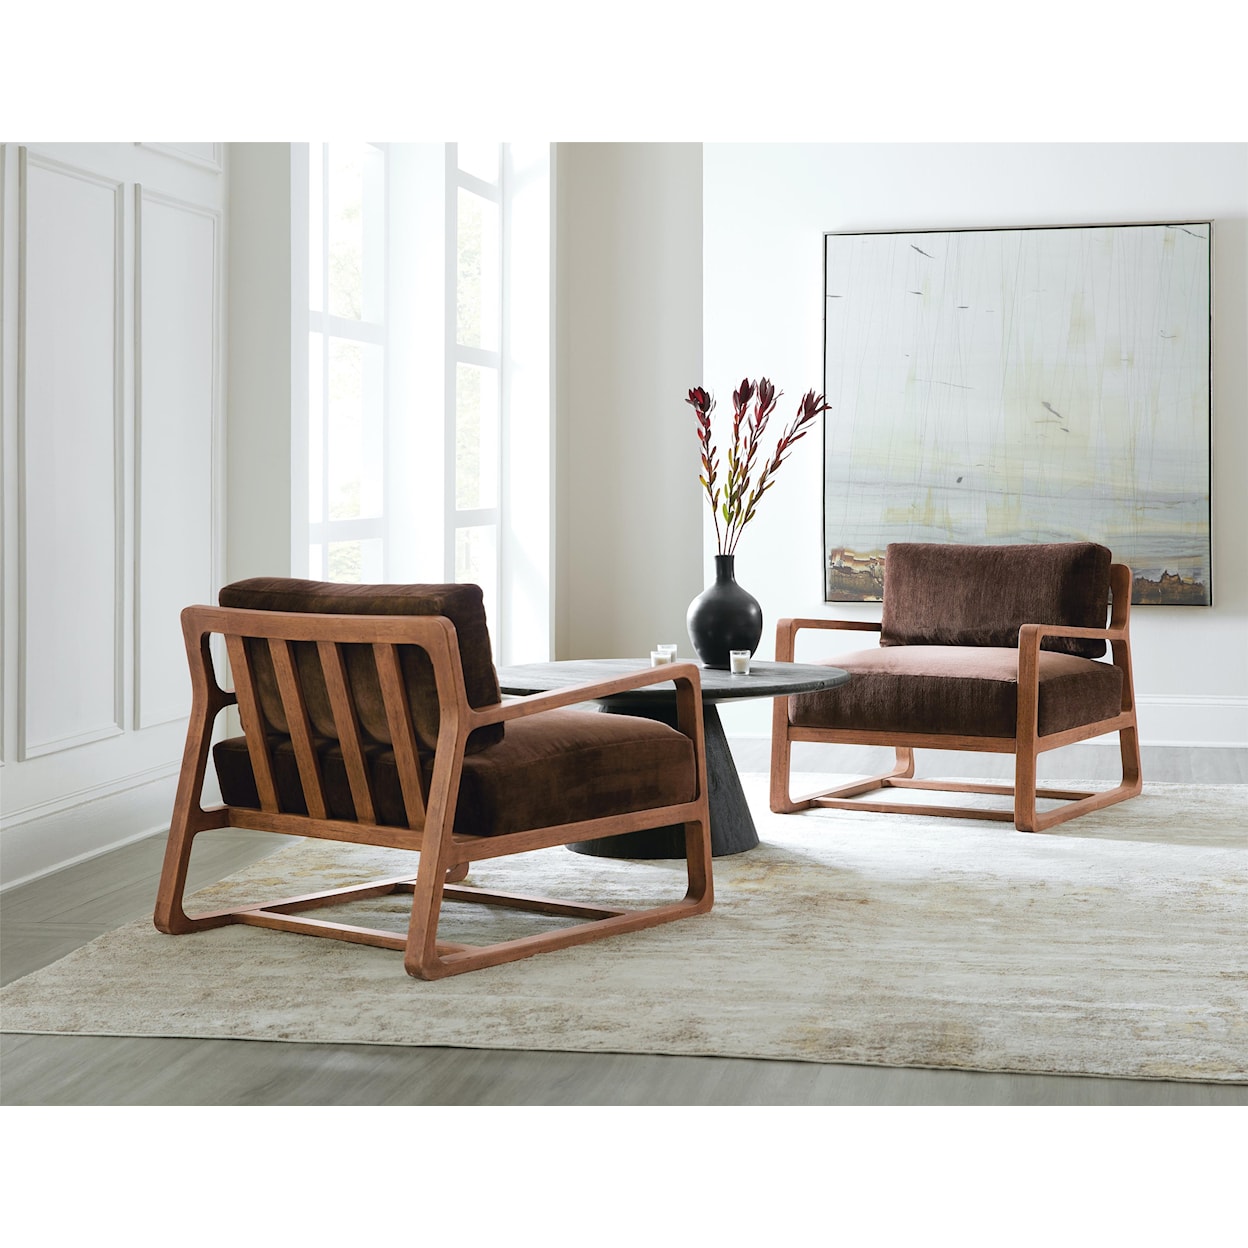 Hooker Furniture Moraine Upholstered Chairs